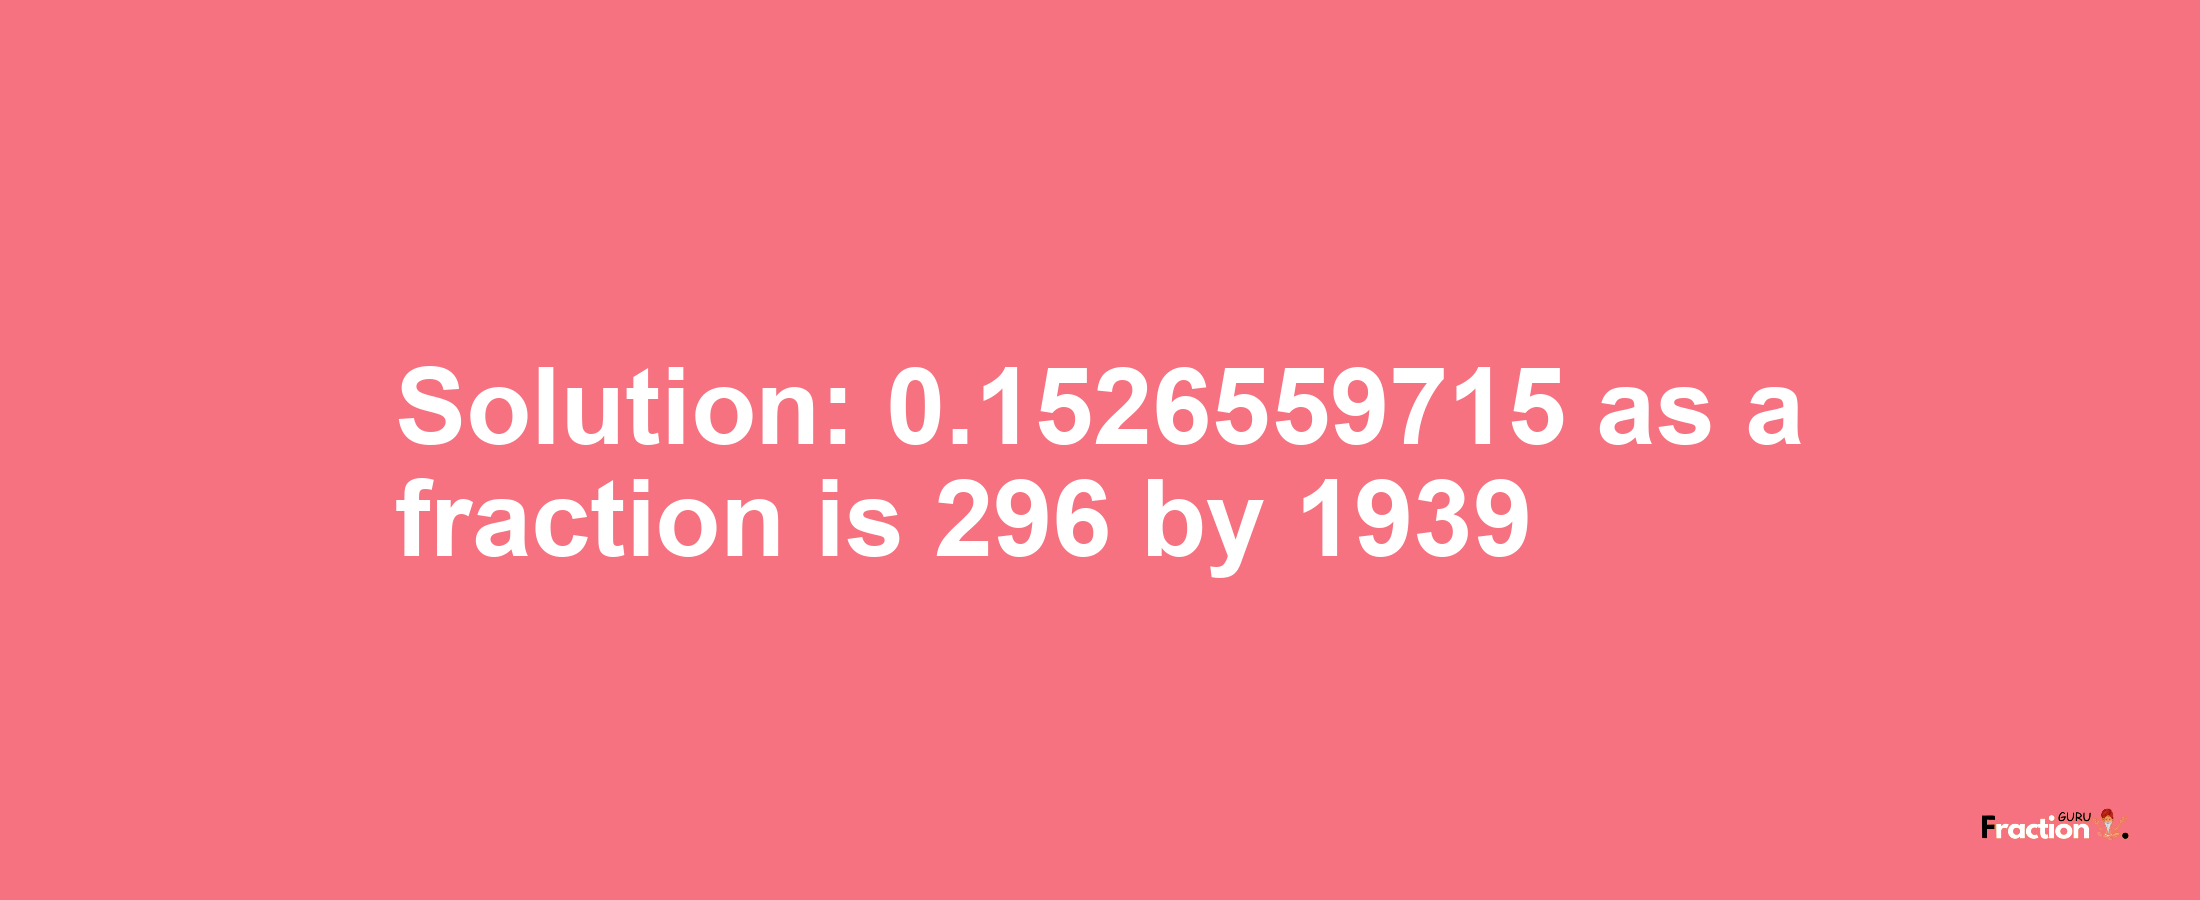 Solution:0.1526559715 as a fraction is 296/1939